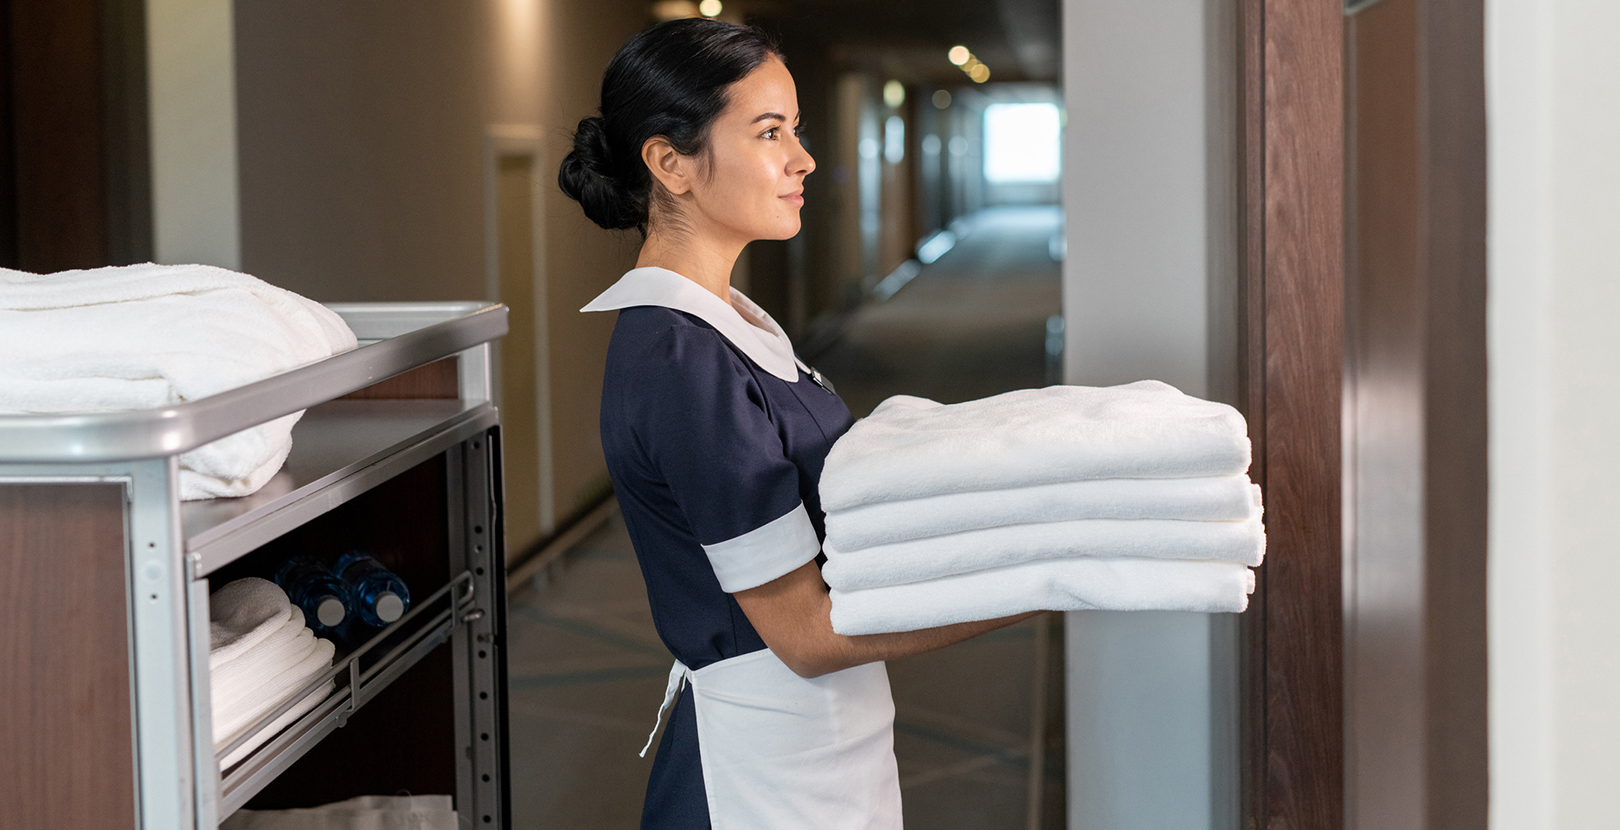 Hotel Cleaning Service: A hotel housekeeper delivering sheets to a room